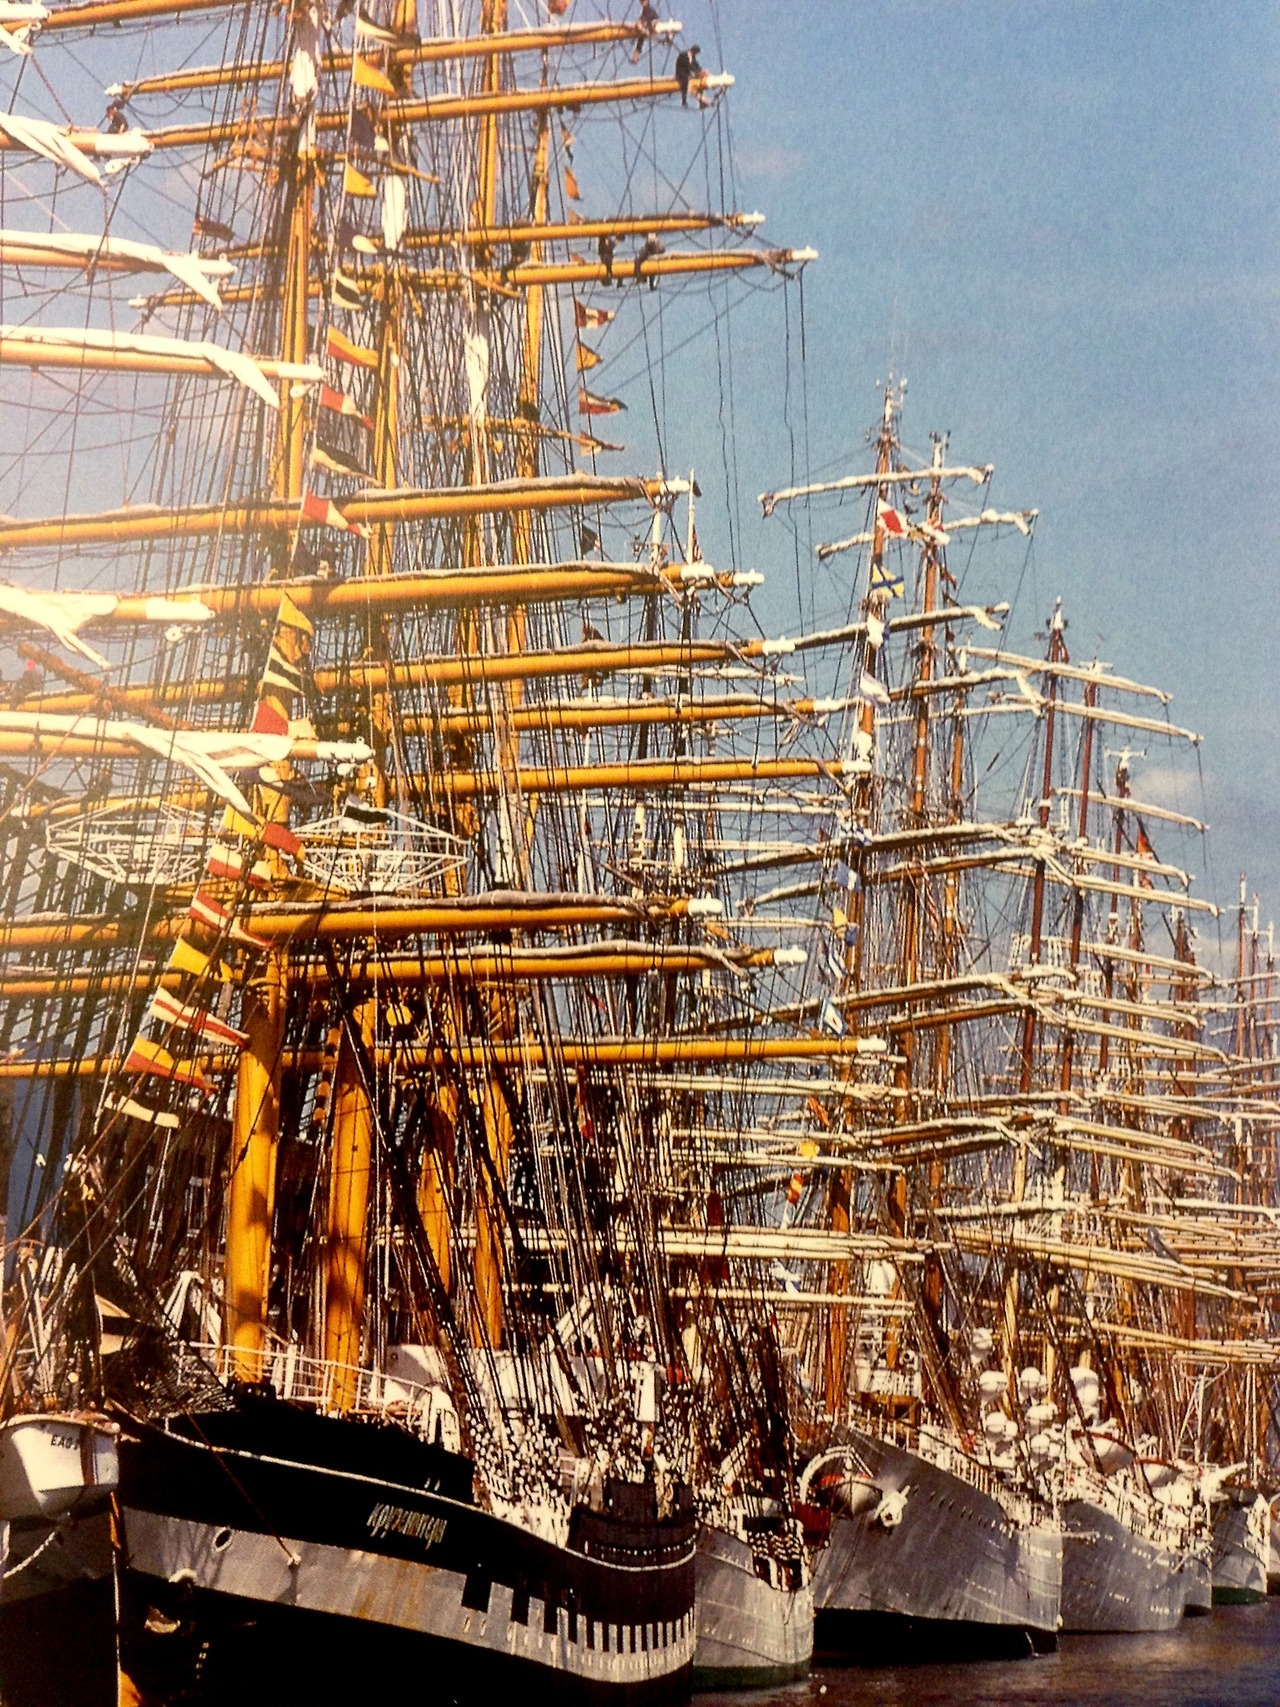 rickinmar:
“Boston over the years has had many Tall Ships events ,starting in the 1970s. This late 1990s photo is by Ulrike Welsch and shows Black Falcon Pier, with the Russian barque Kruzenshtern first up.
”